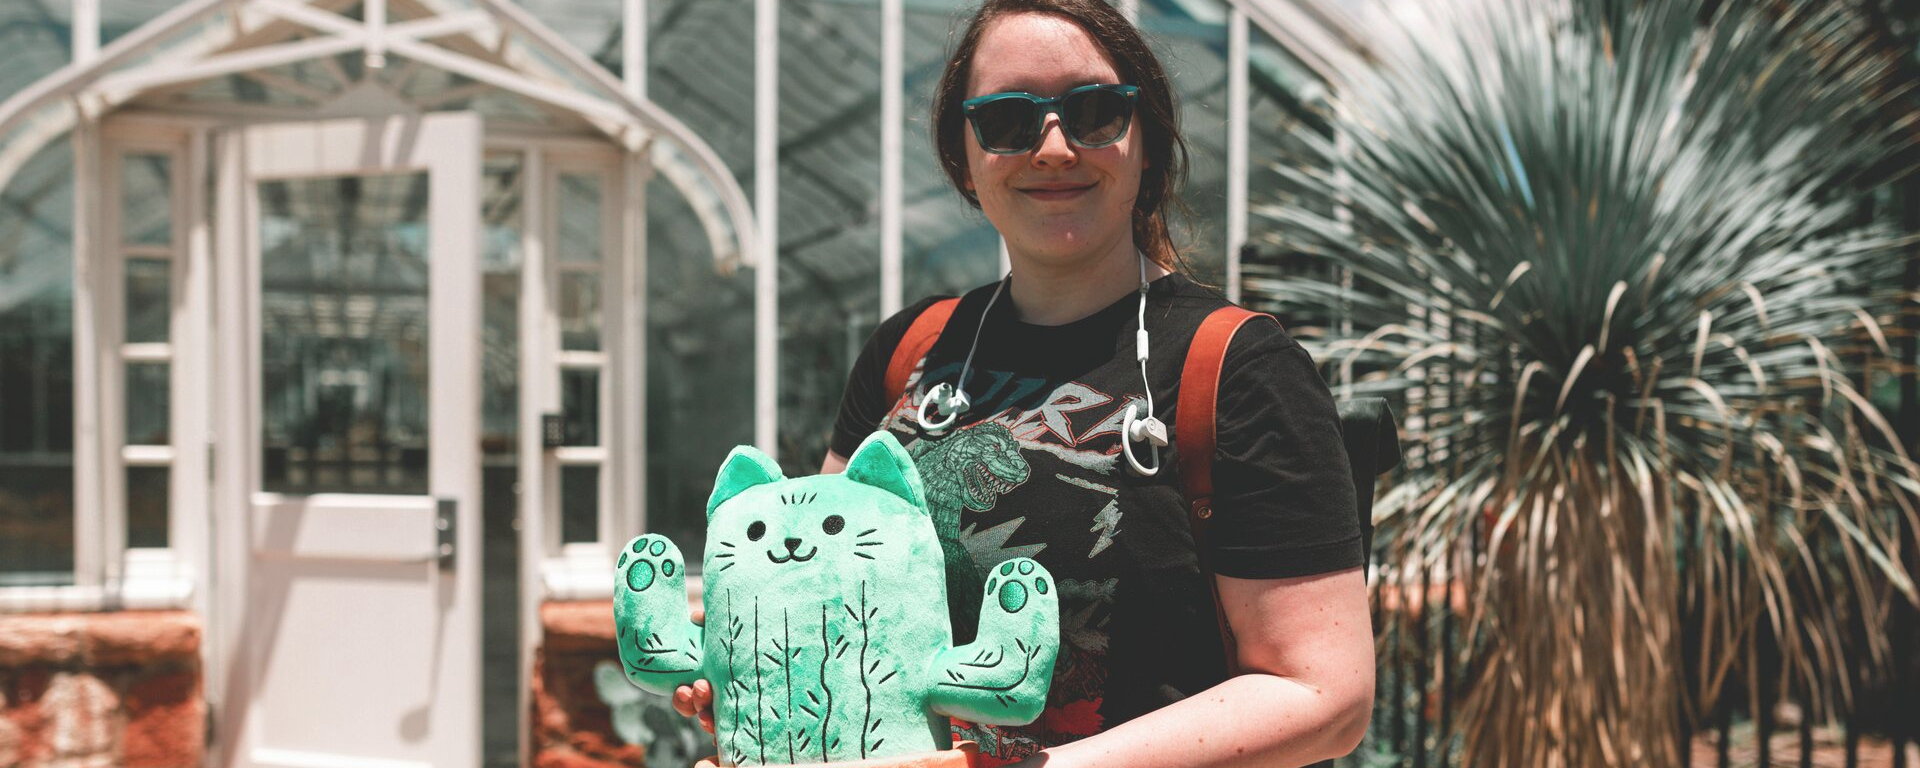 Alexandra Brodt with her Catcus plush